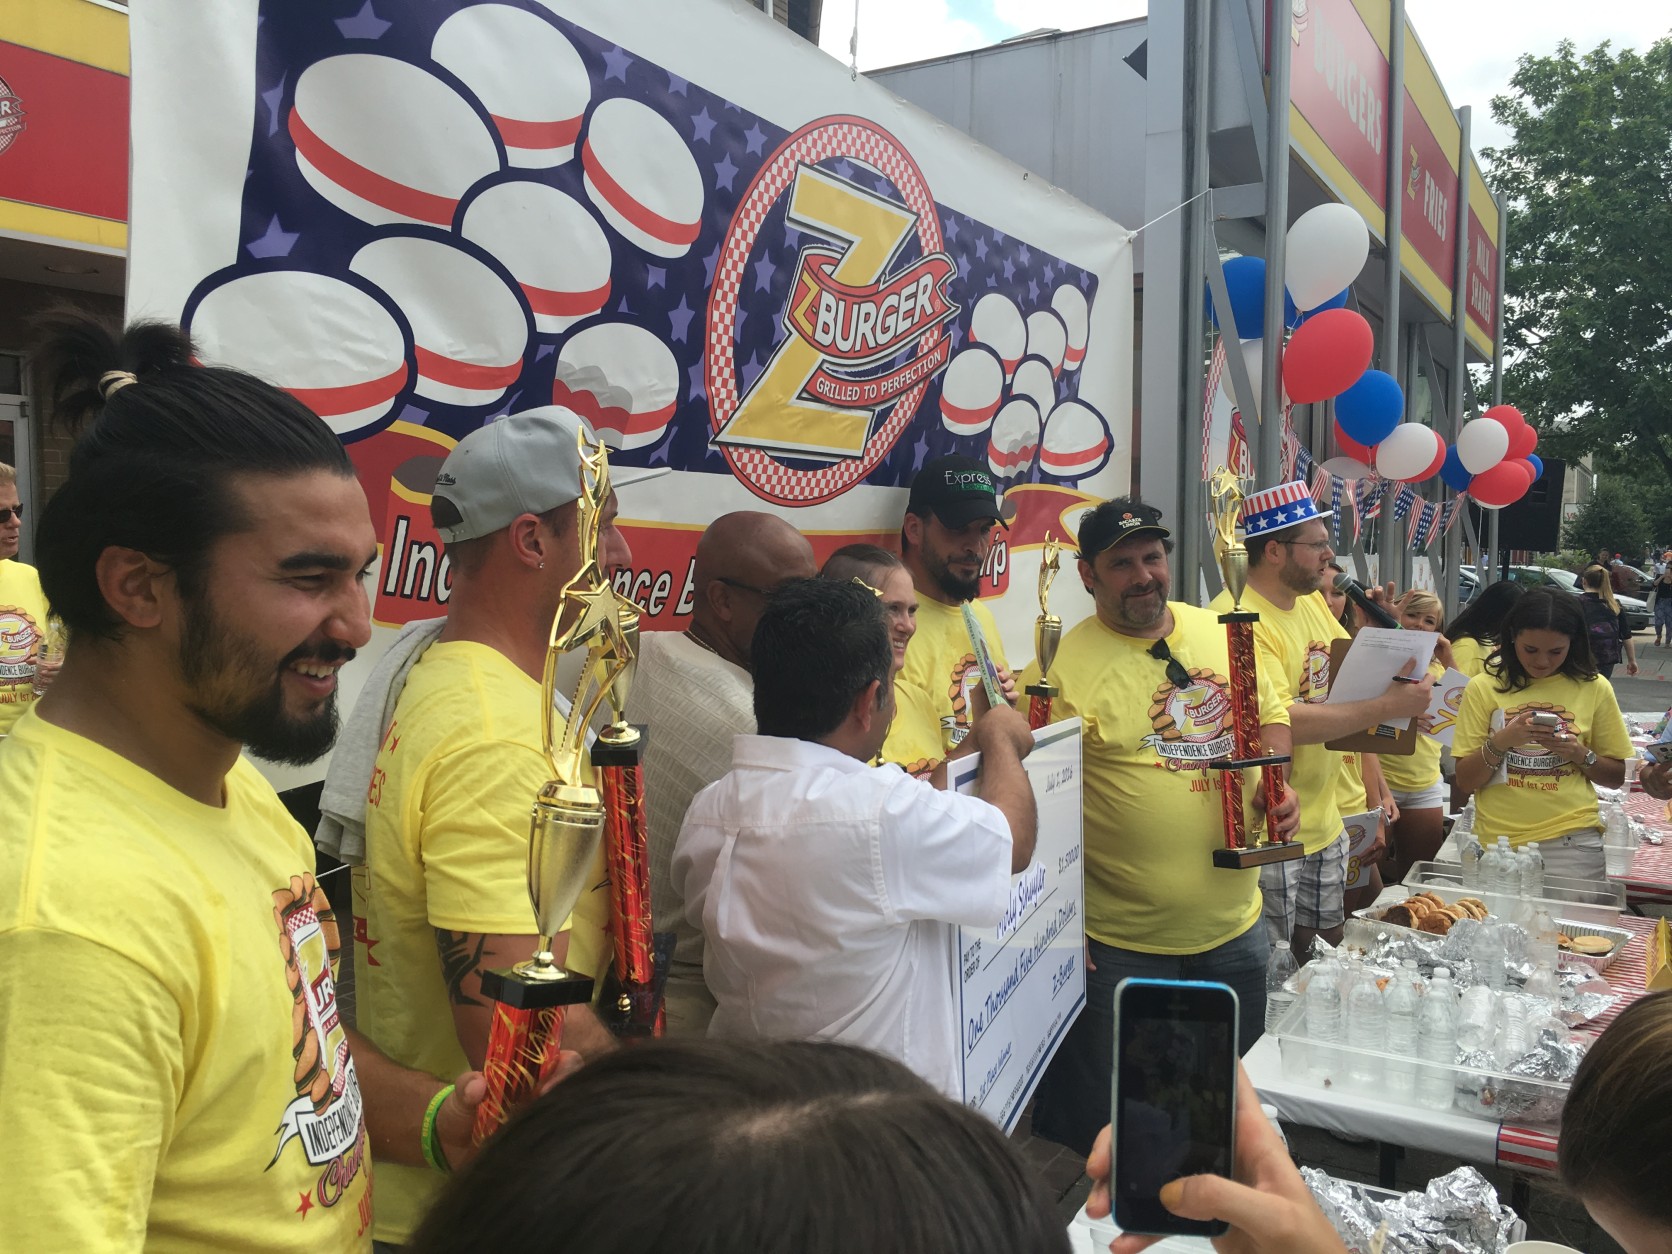 The winners gather to collect their prizes and trophies after keeping the burgers down for two minutes. (WTOP/Mike Murillo)